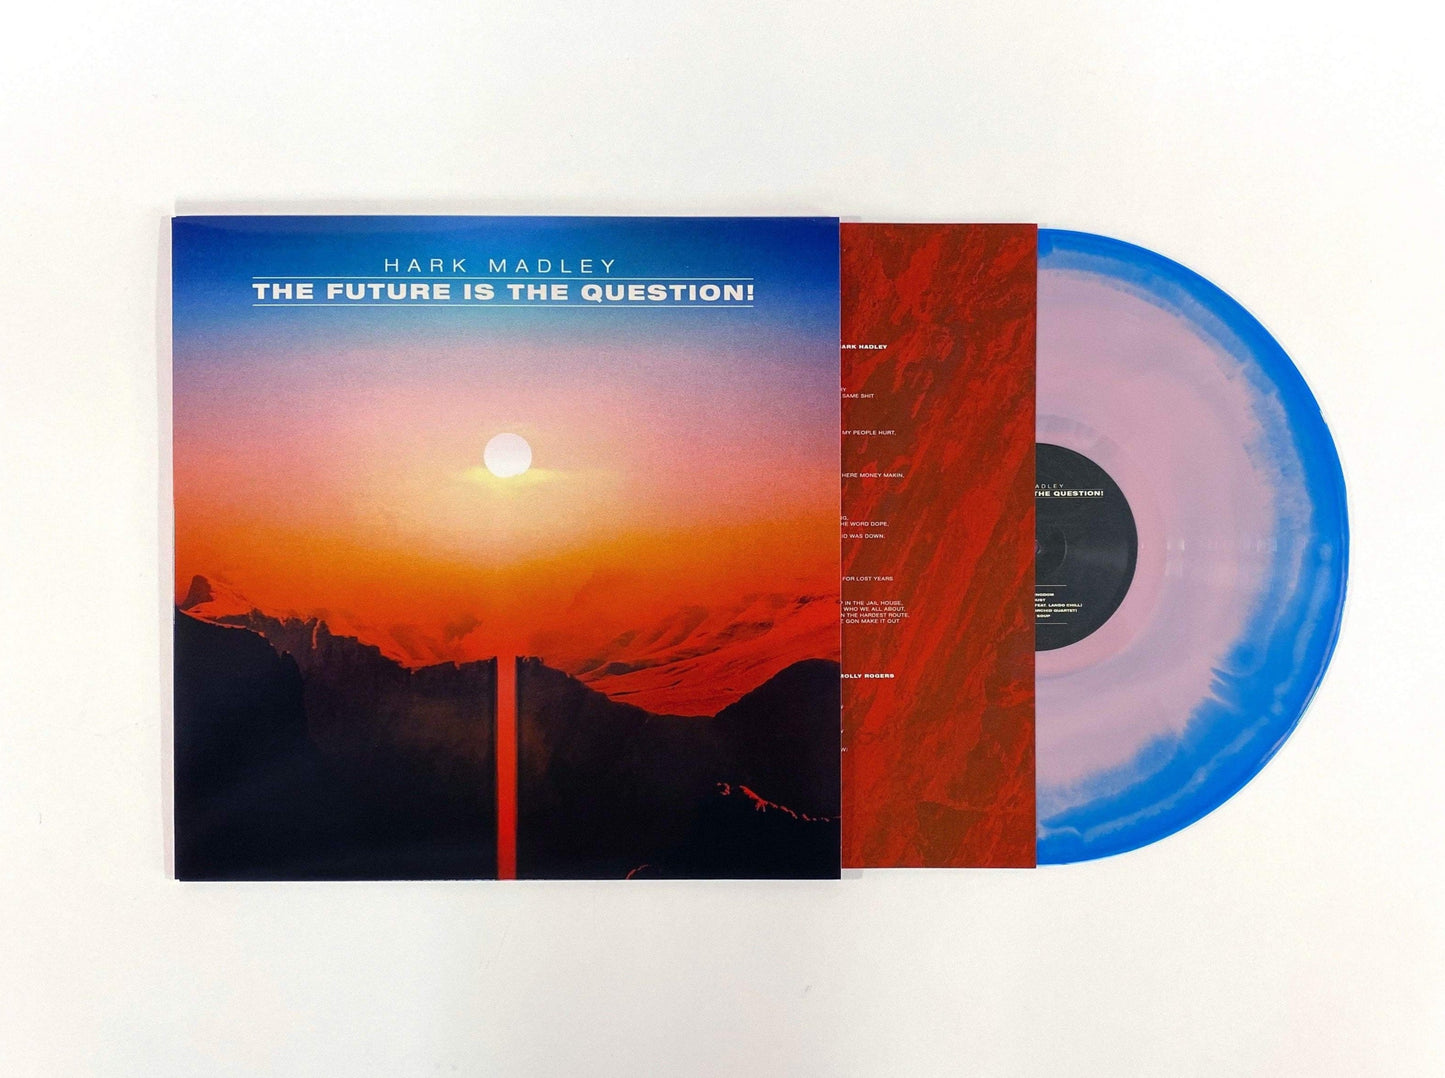 Hark Madley - The Future Is The Question! LP [VM Edition - Ltd. to 100] - VINYL MOON